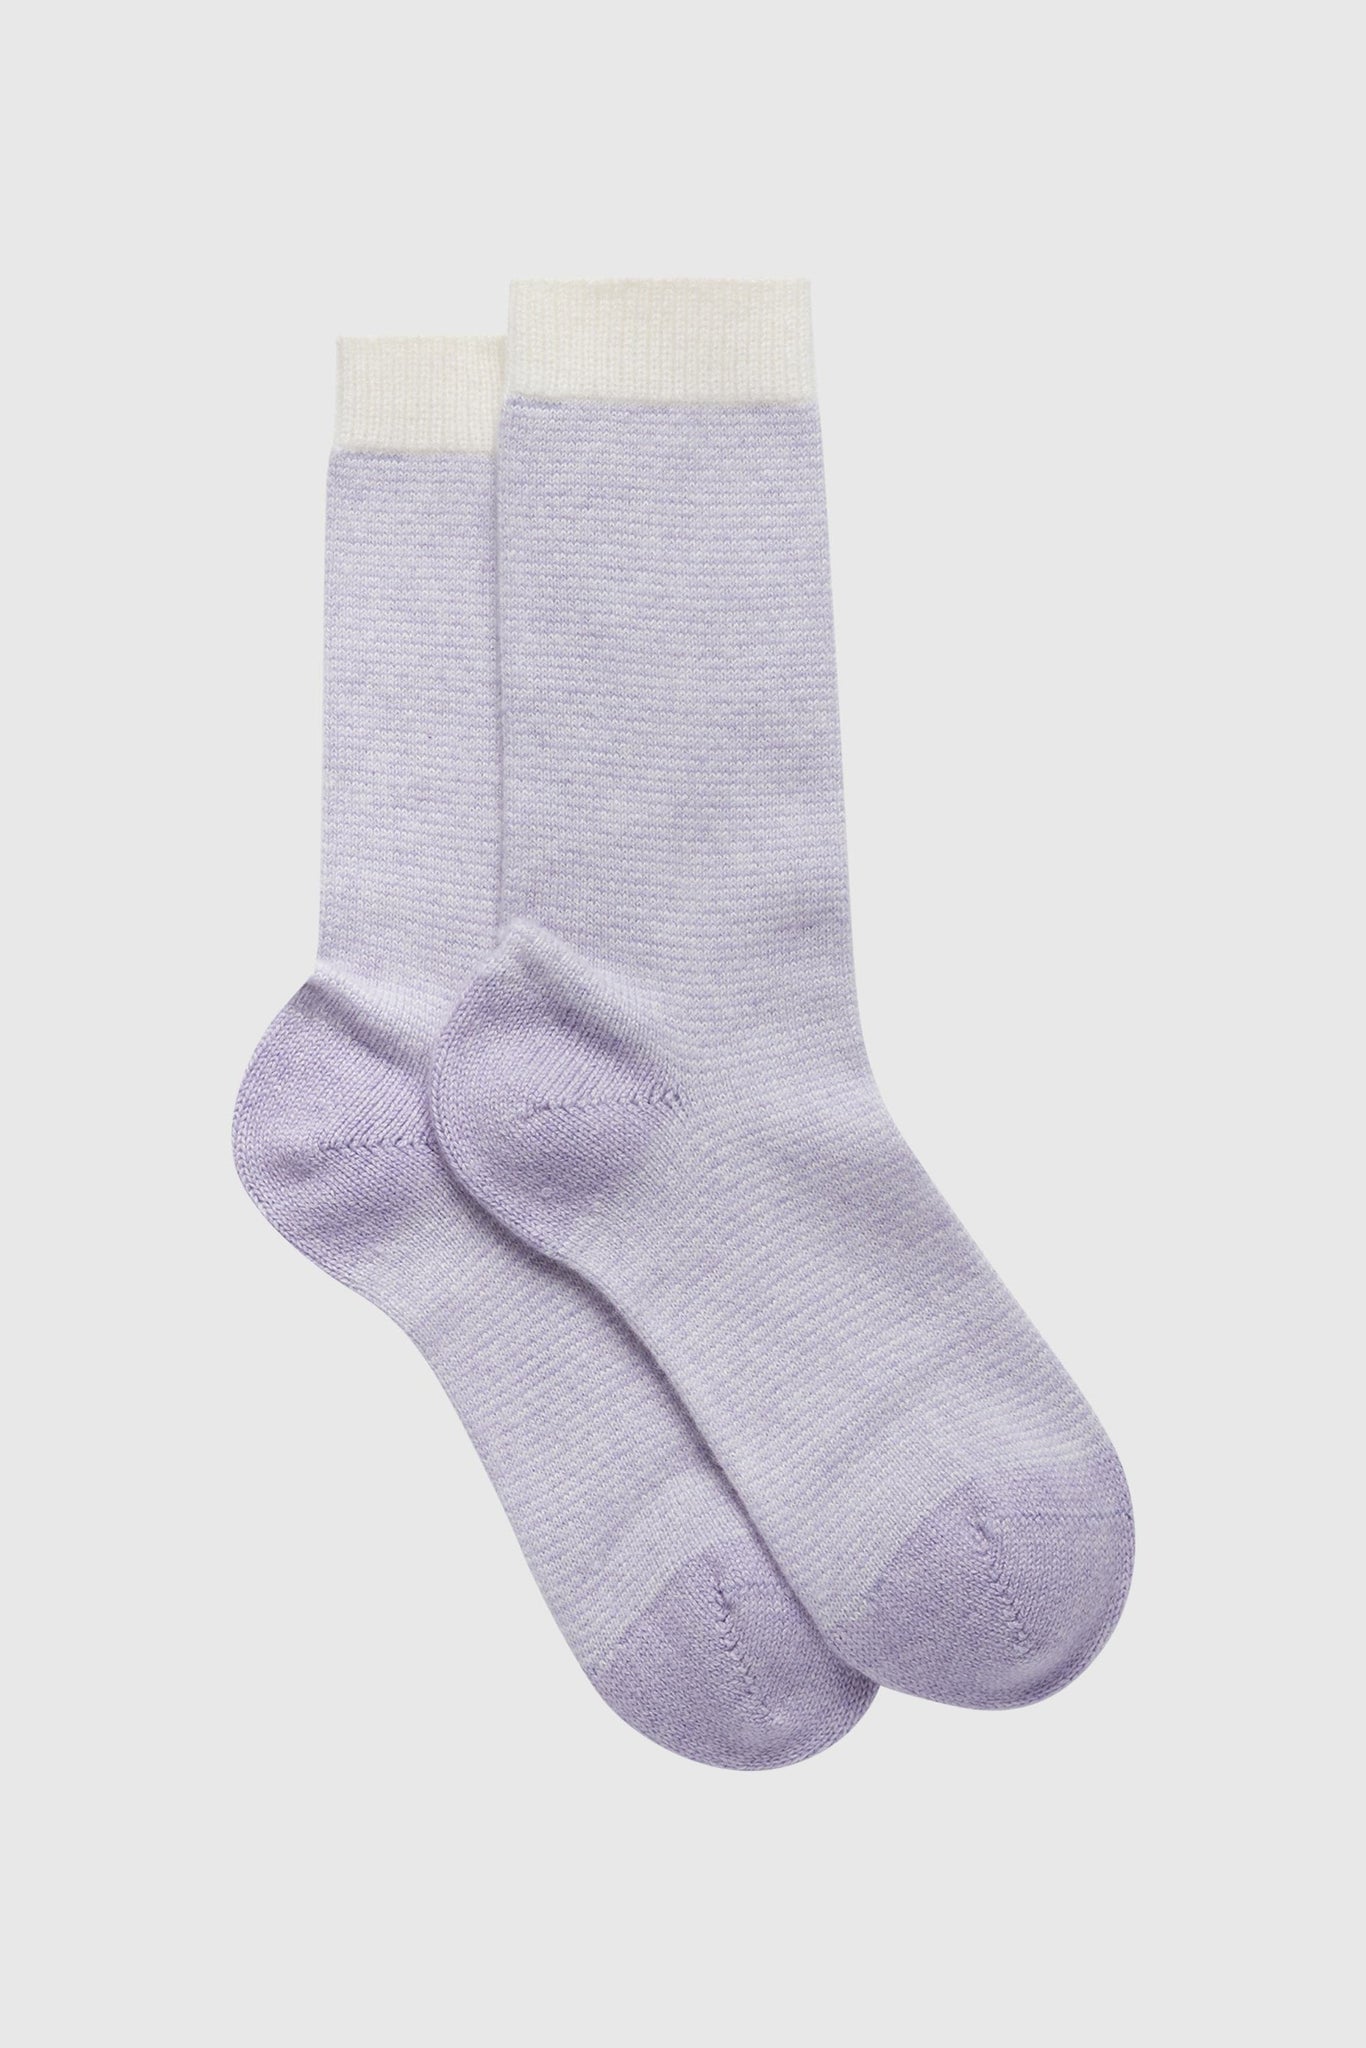 Women's Striped Cashmere Bed Socks | Lilac Striped Cashmere Socks | Quality women's Socks - Gifts for Her by Lavender Hill Clothing